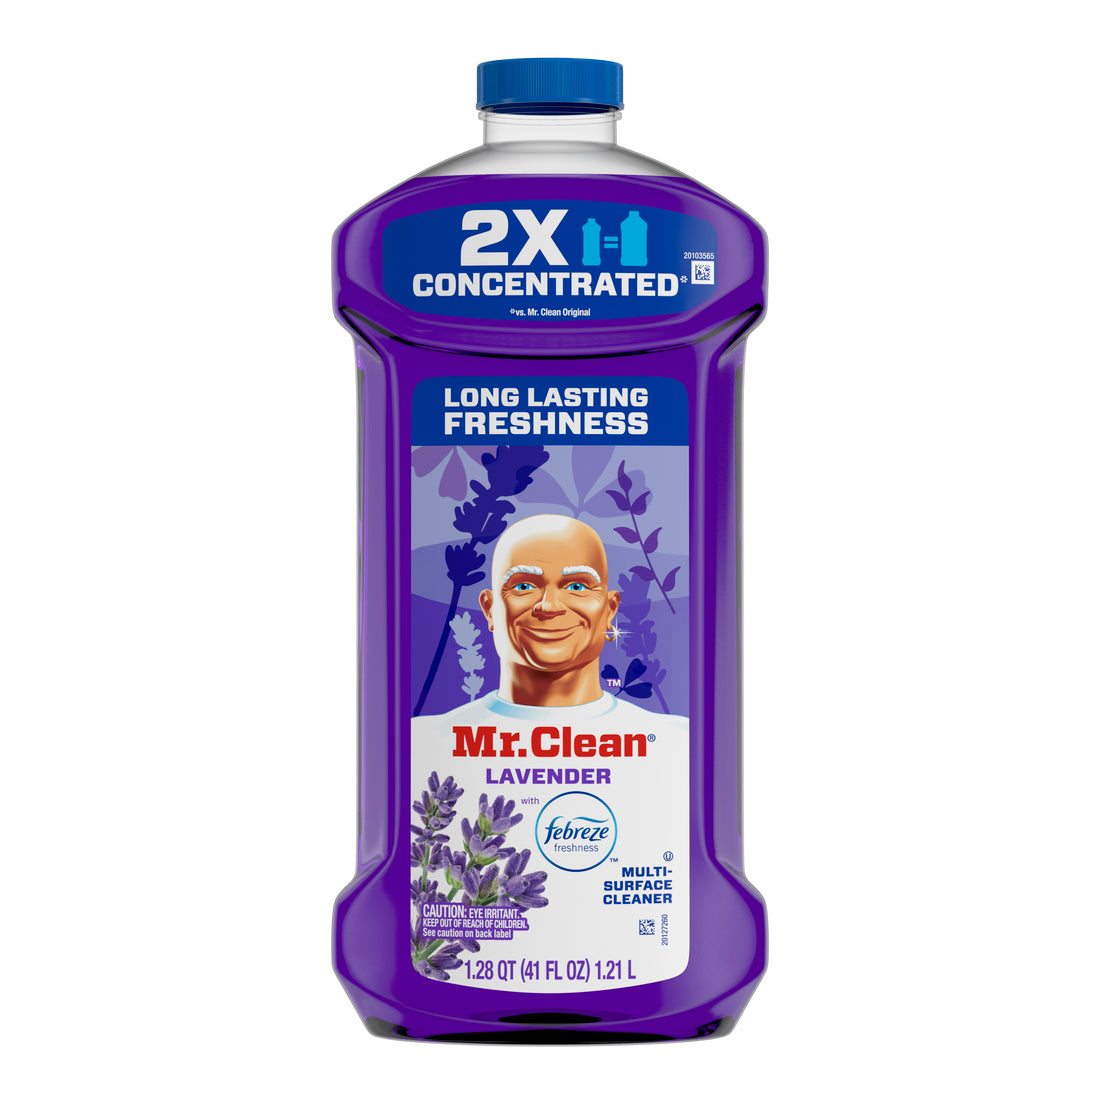 Mr. Clean 2X Concentrated Multi Surface Cleaner with Febreze Lavender Scent-41oz/6pk